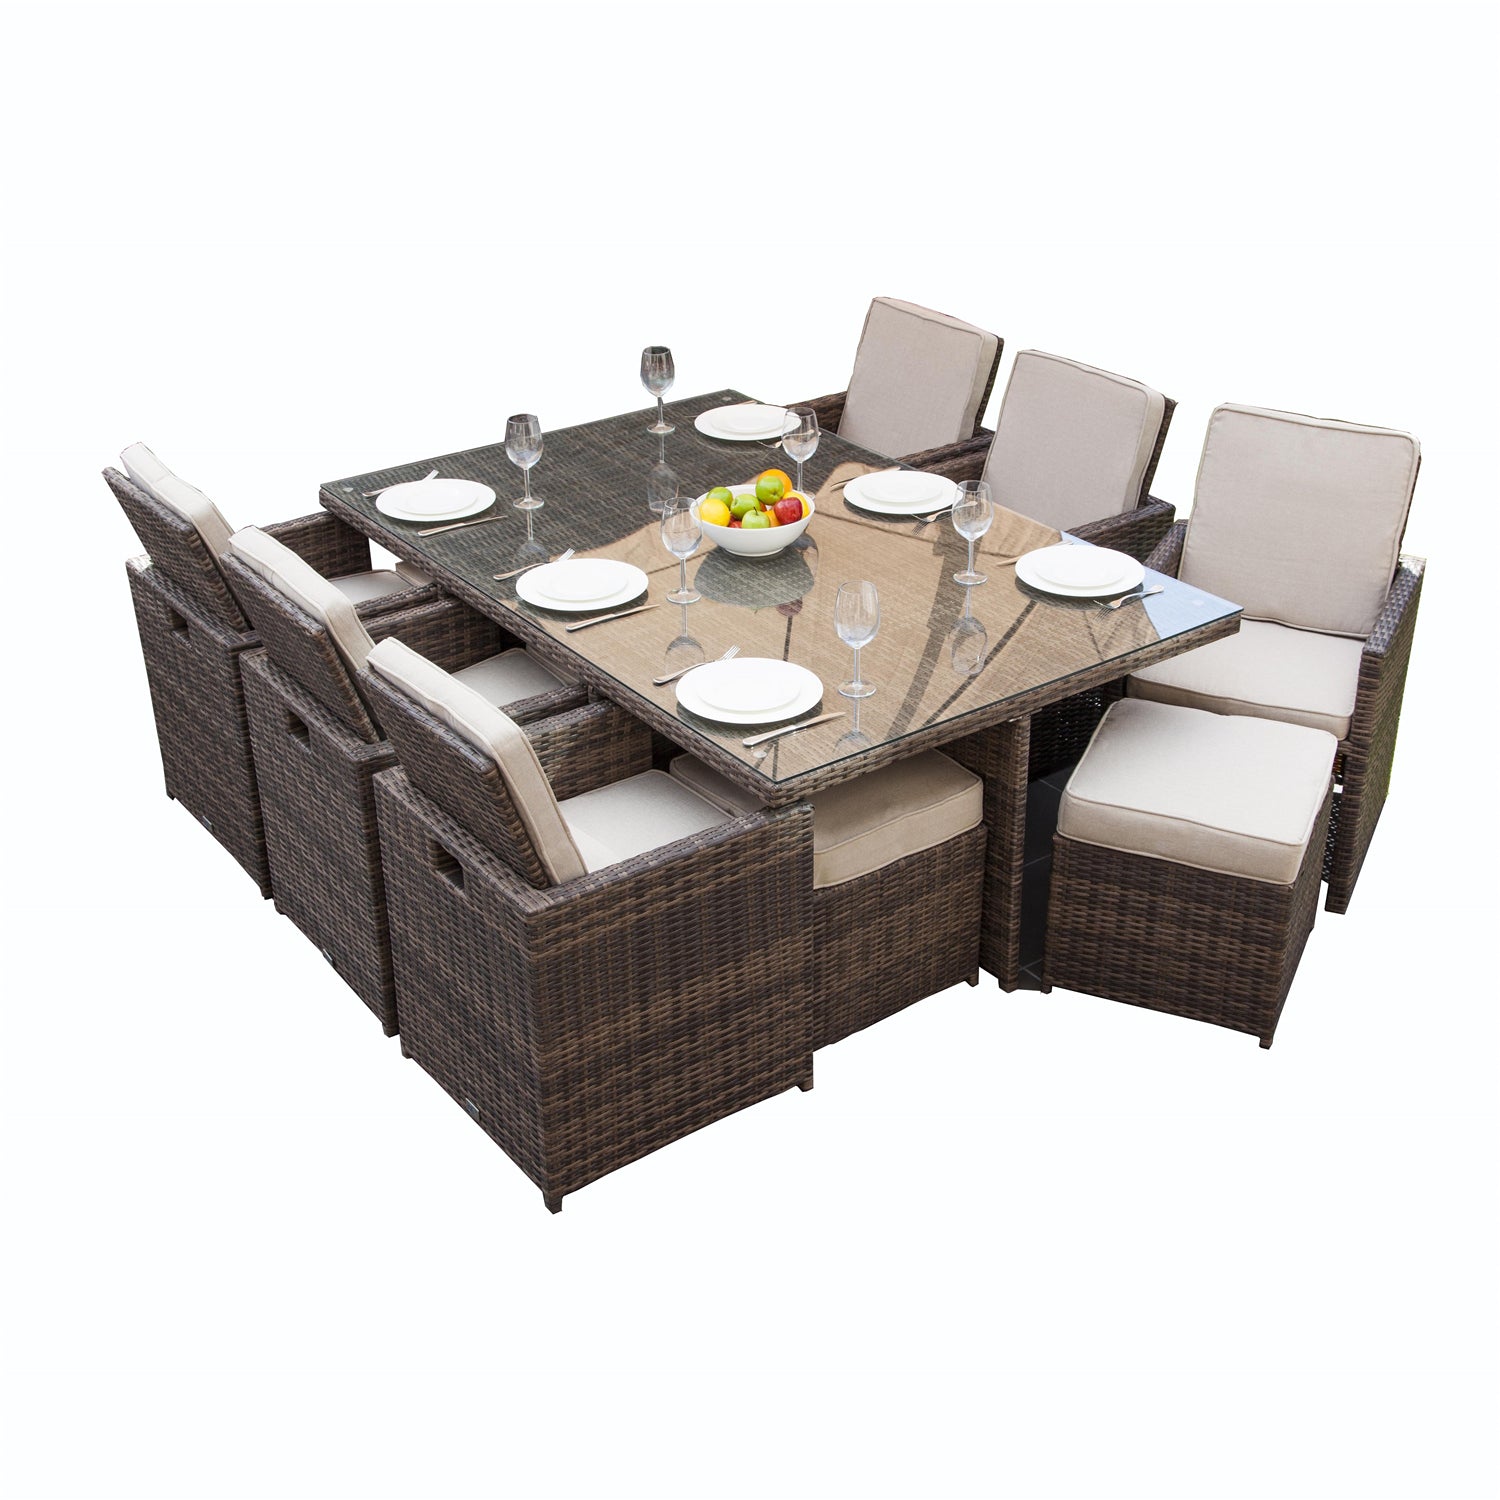 A 10-piece outdoor furniture set made of wicker, including a dining table and stools, which can be freely combined to suit family gatherings